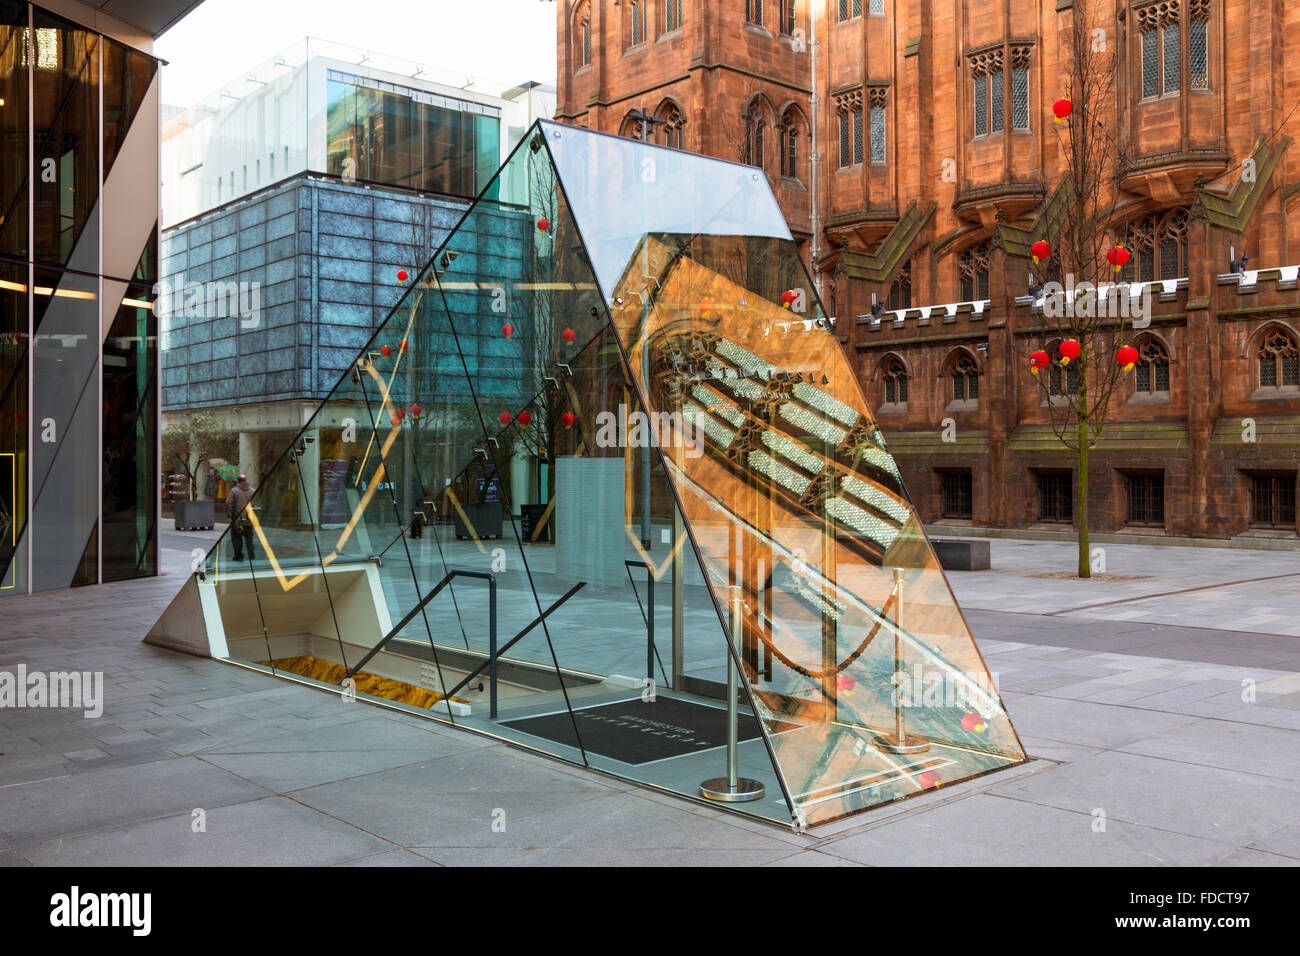 The glass entrance to the underground Australasia Restaurant, Spinningfields, Deansgate, Manchester, UK. John Rylands library behind. Stock Photo